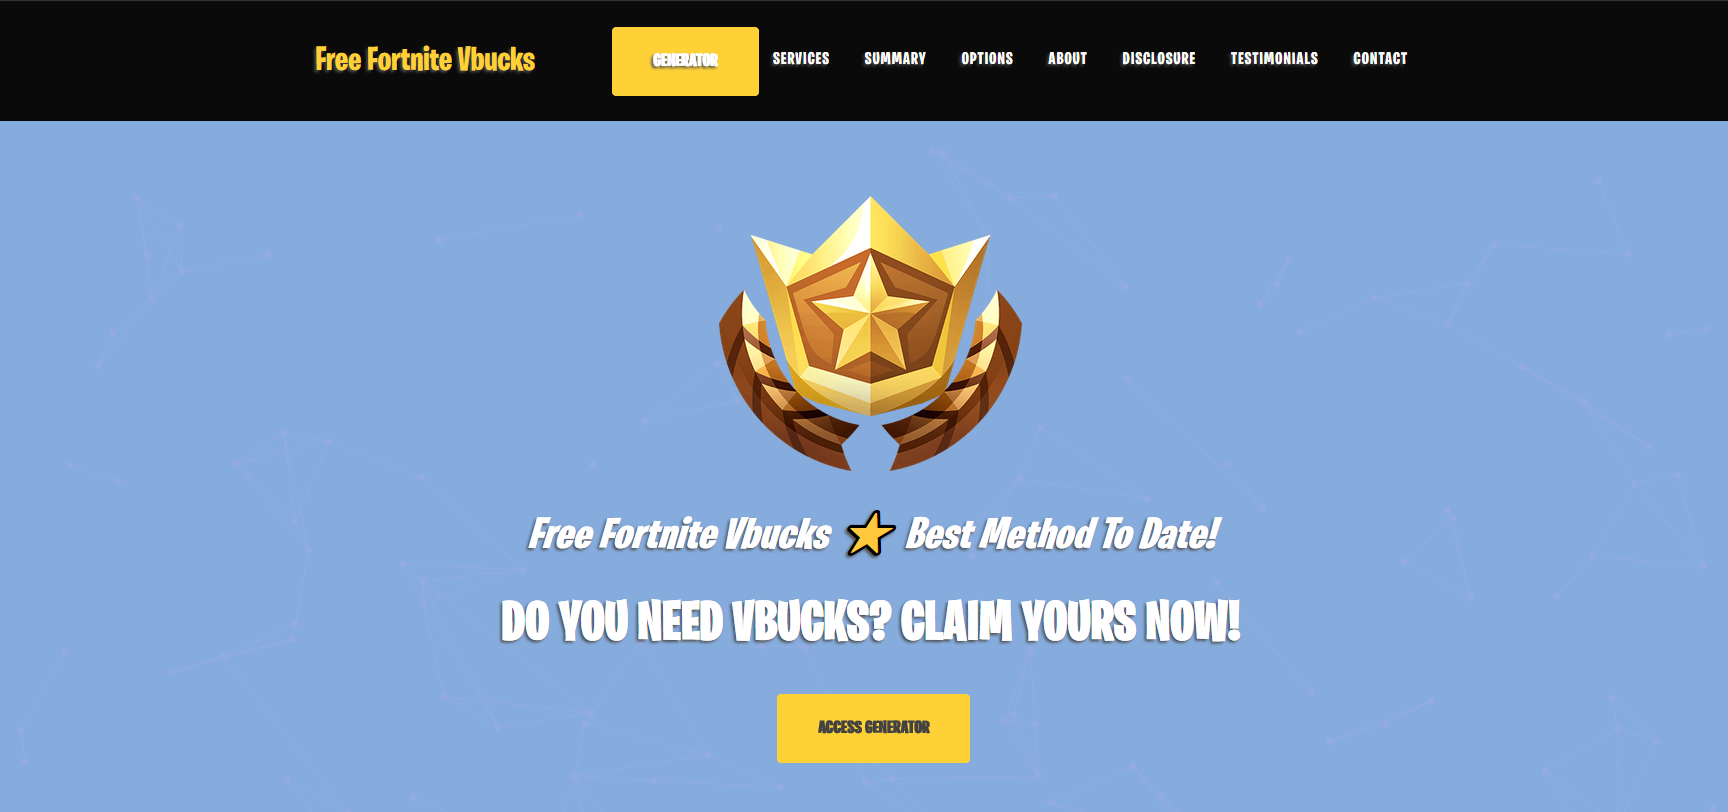 Use our V Bucks Generator to get Free V Bucks in (2020) - 1728 x 812 png 241kB